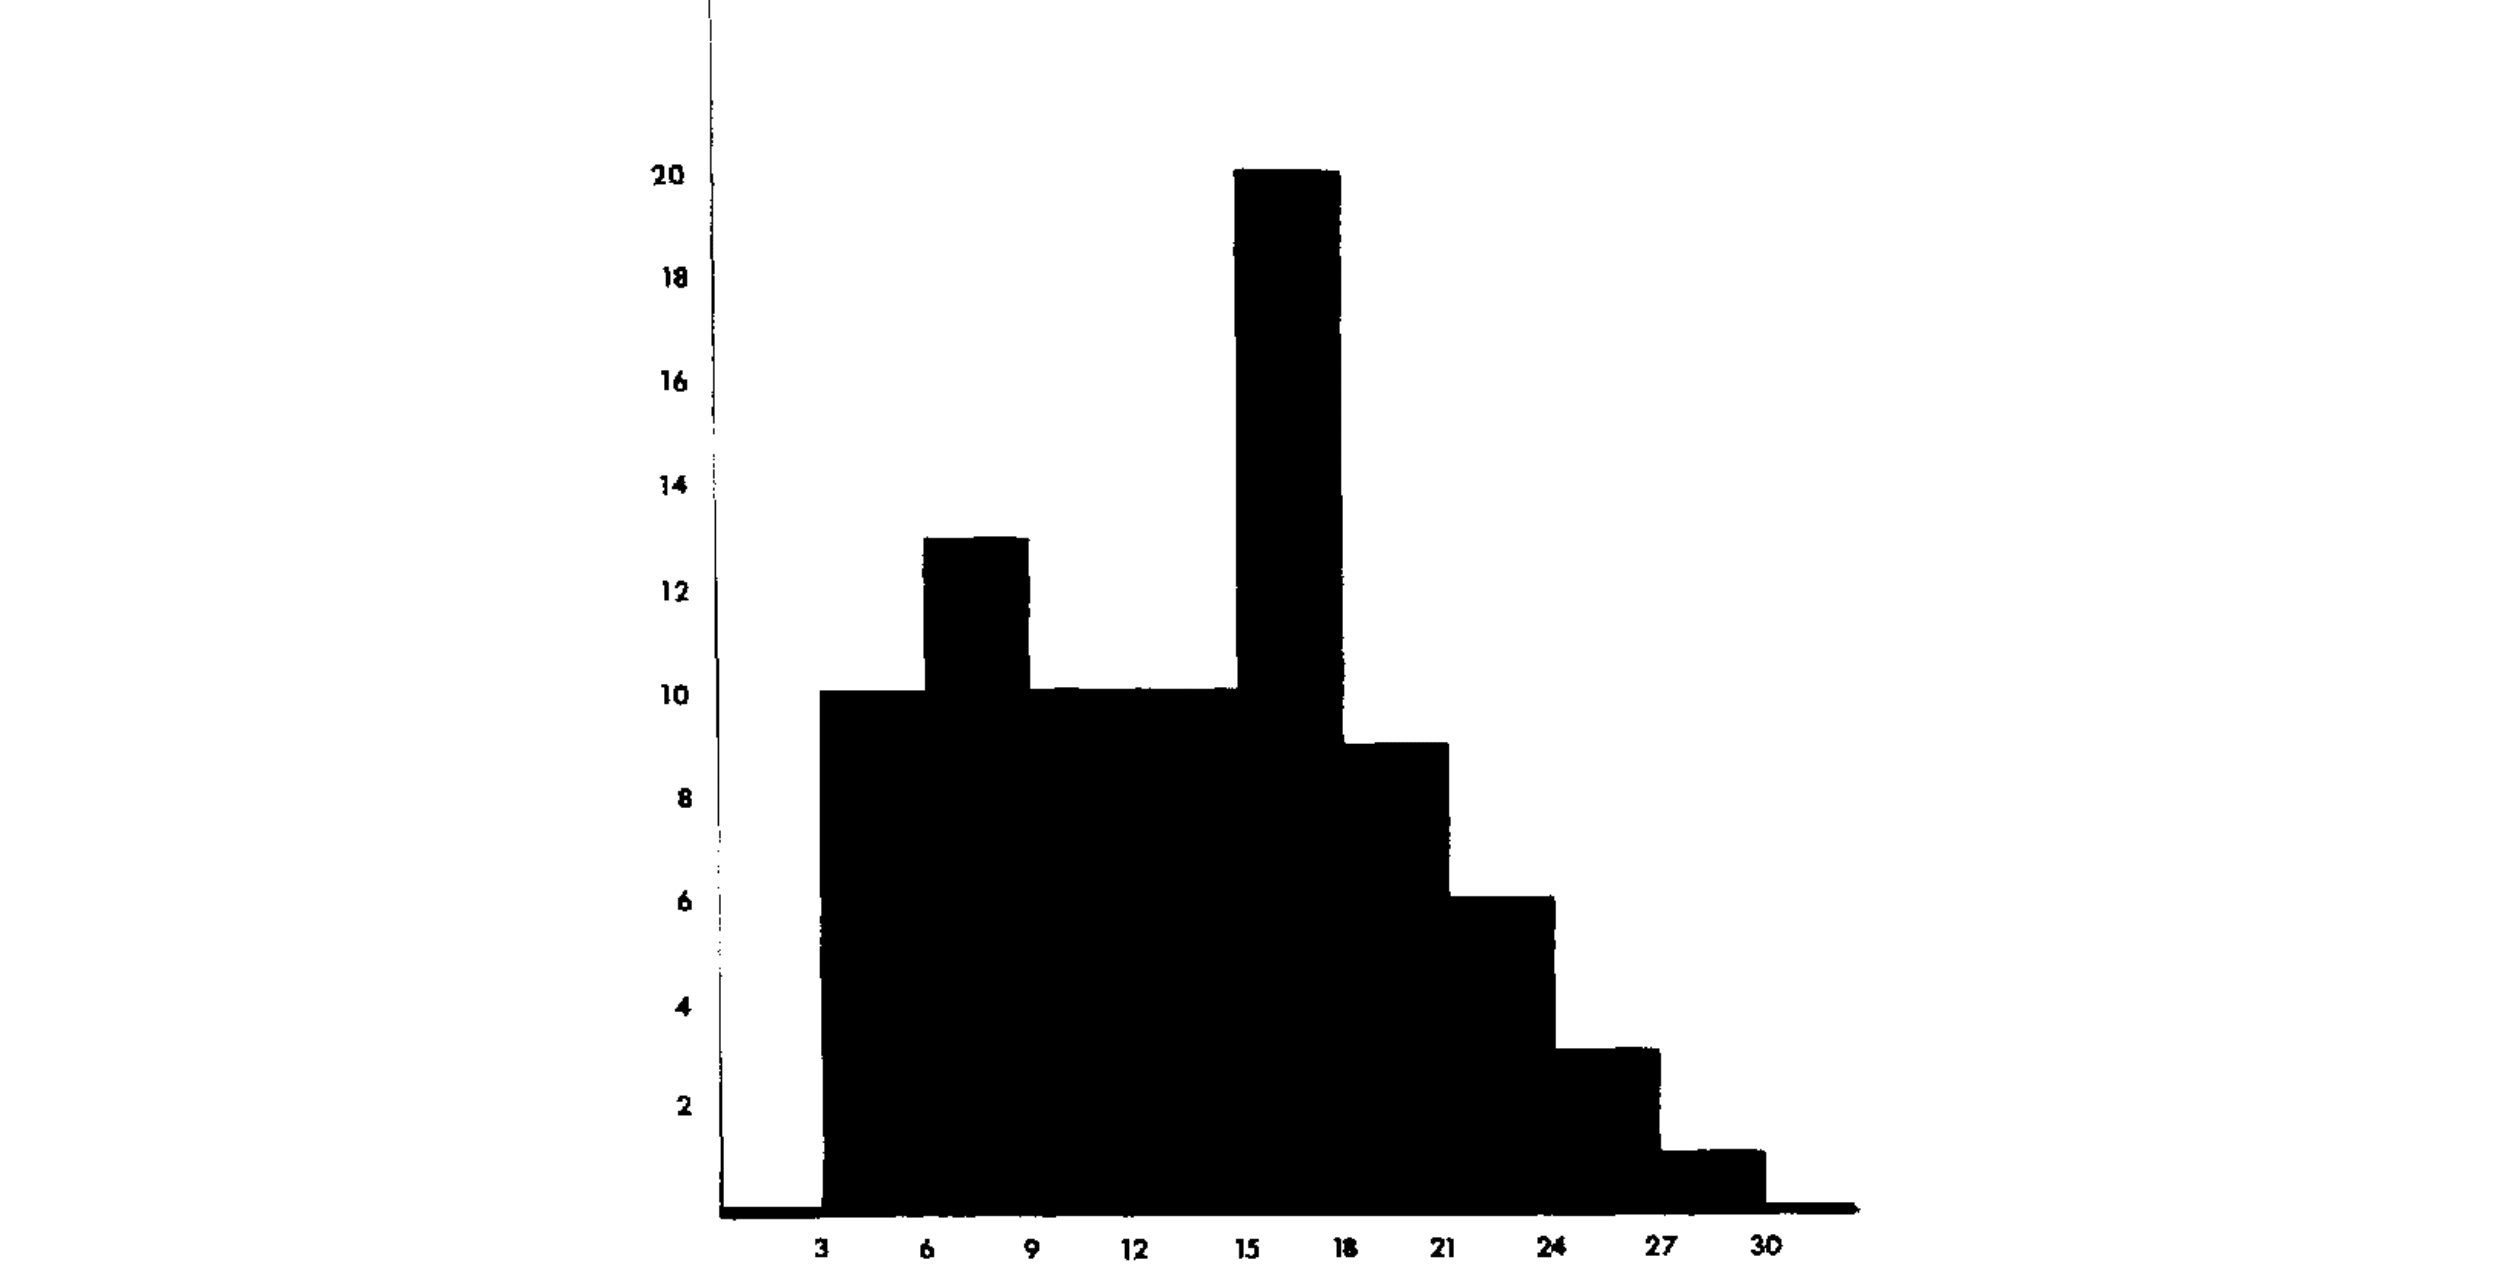 A histogram showing no individuals under 3 years of age, none over 30, and a declining percentage throughout the 20s